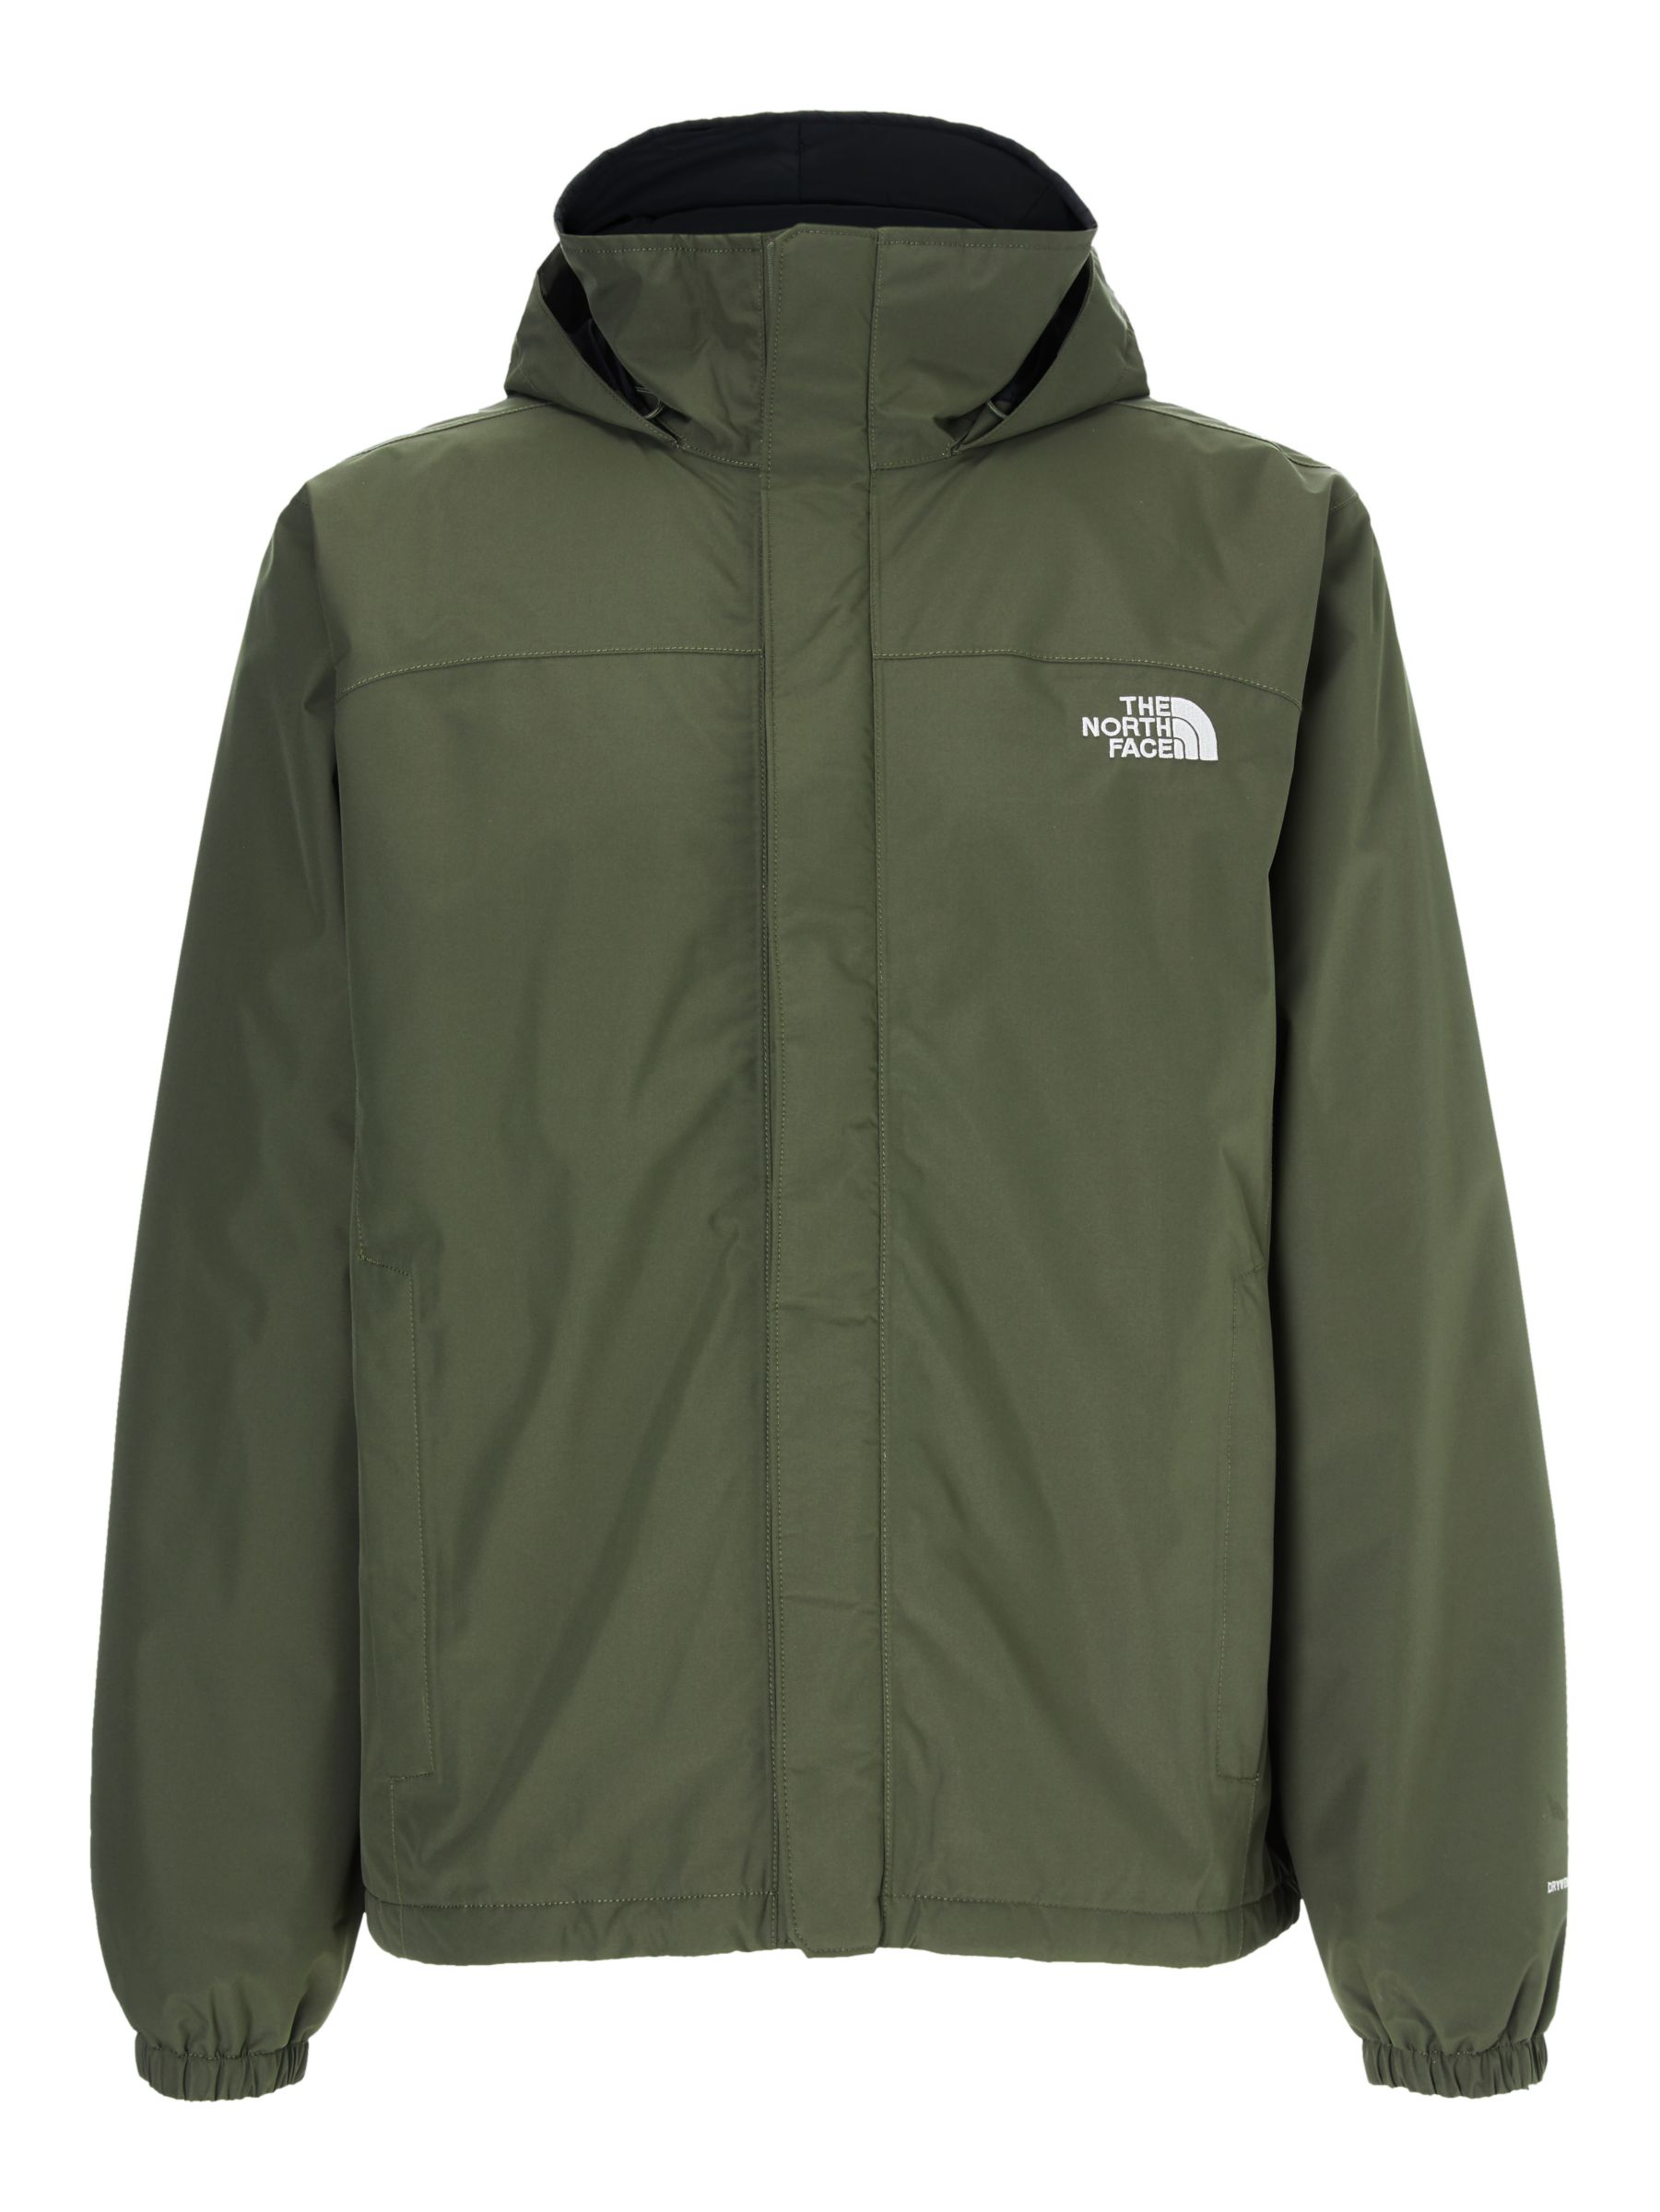 The North Face Resolve Men's Insulated Jacket, New Taupe Green